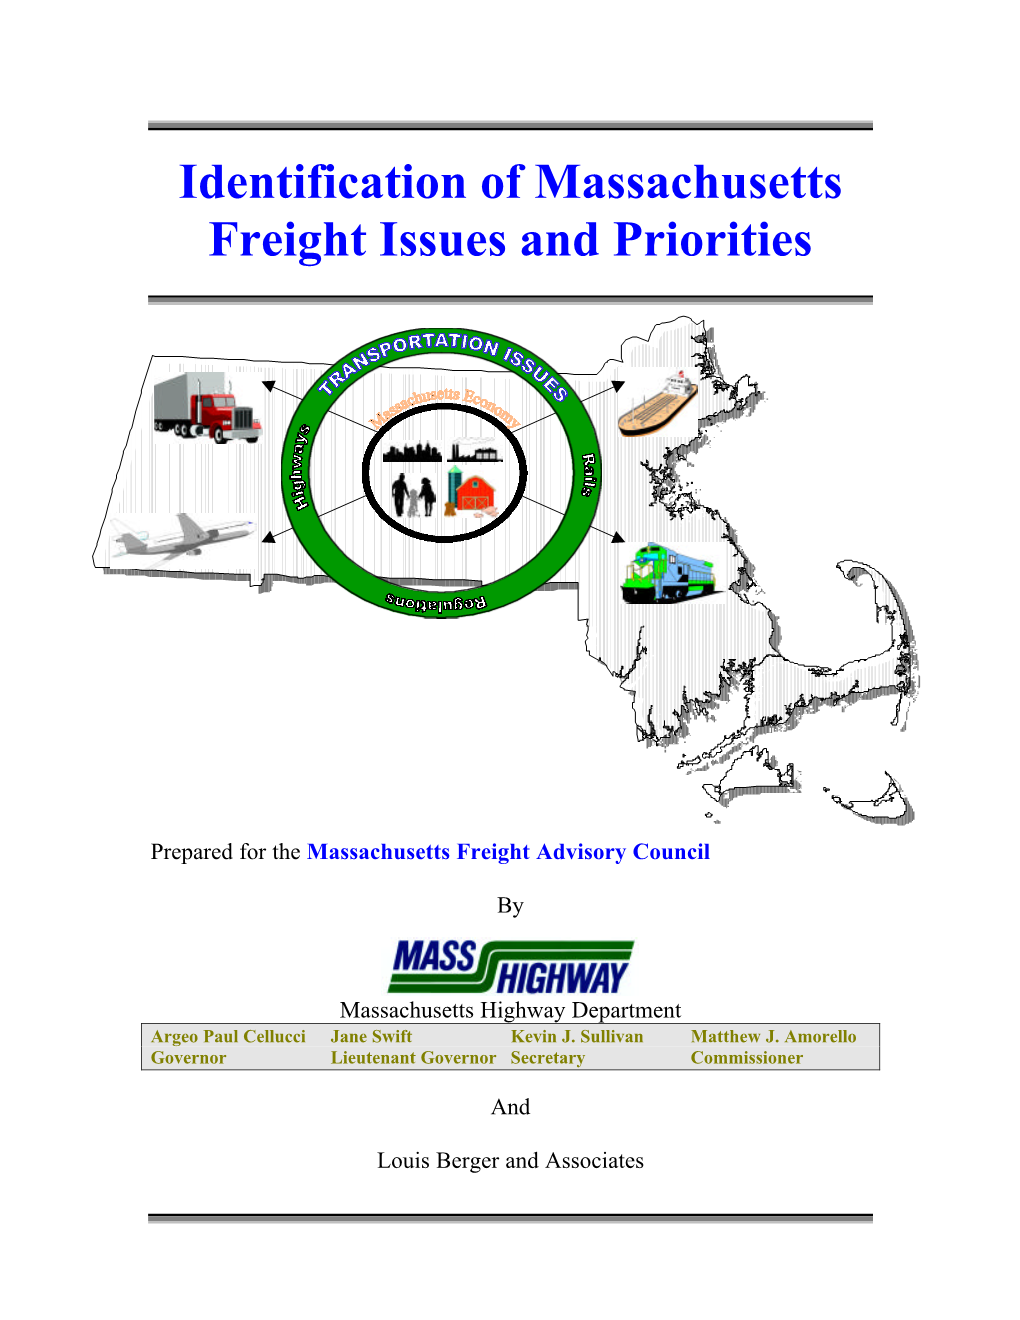 Identification of Massachusetts Freight Issues and Priorities